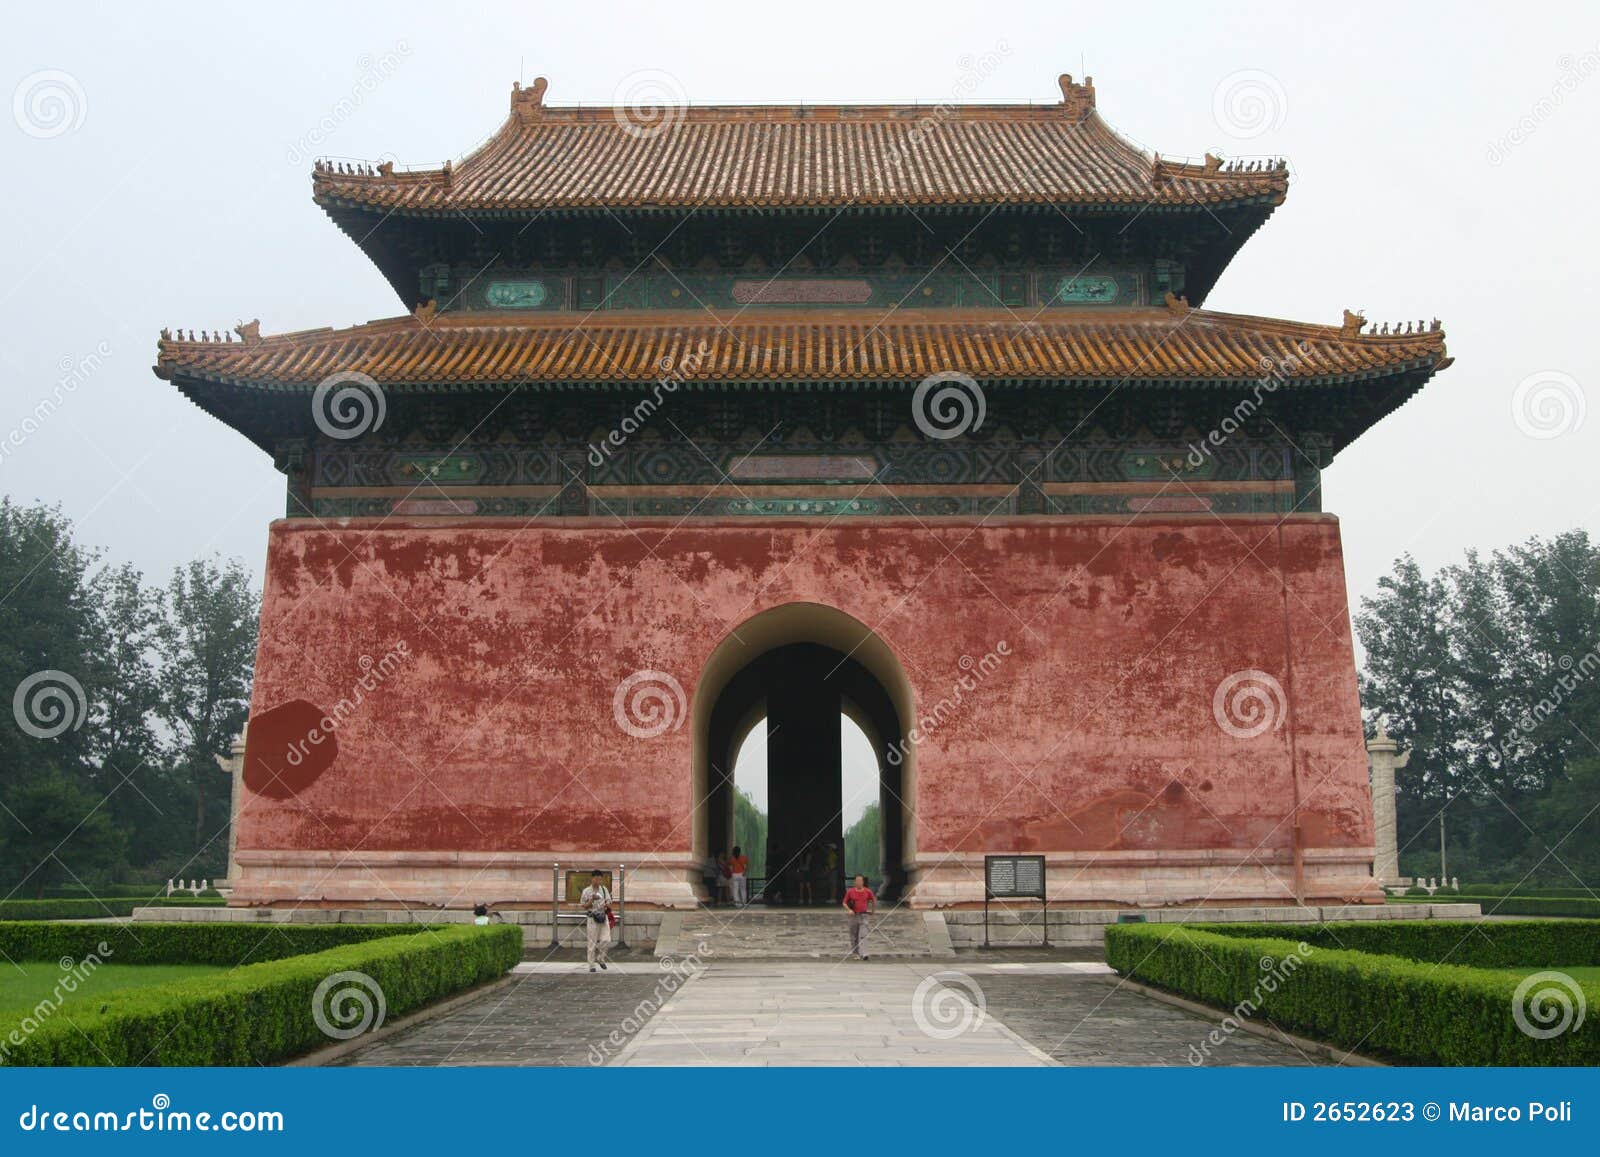 the ming tombs